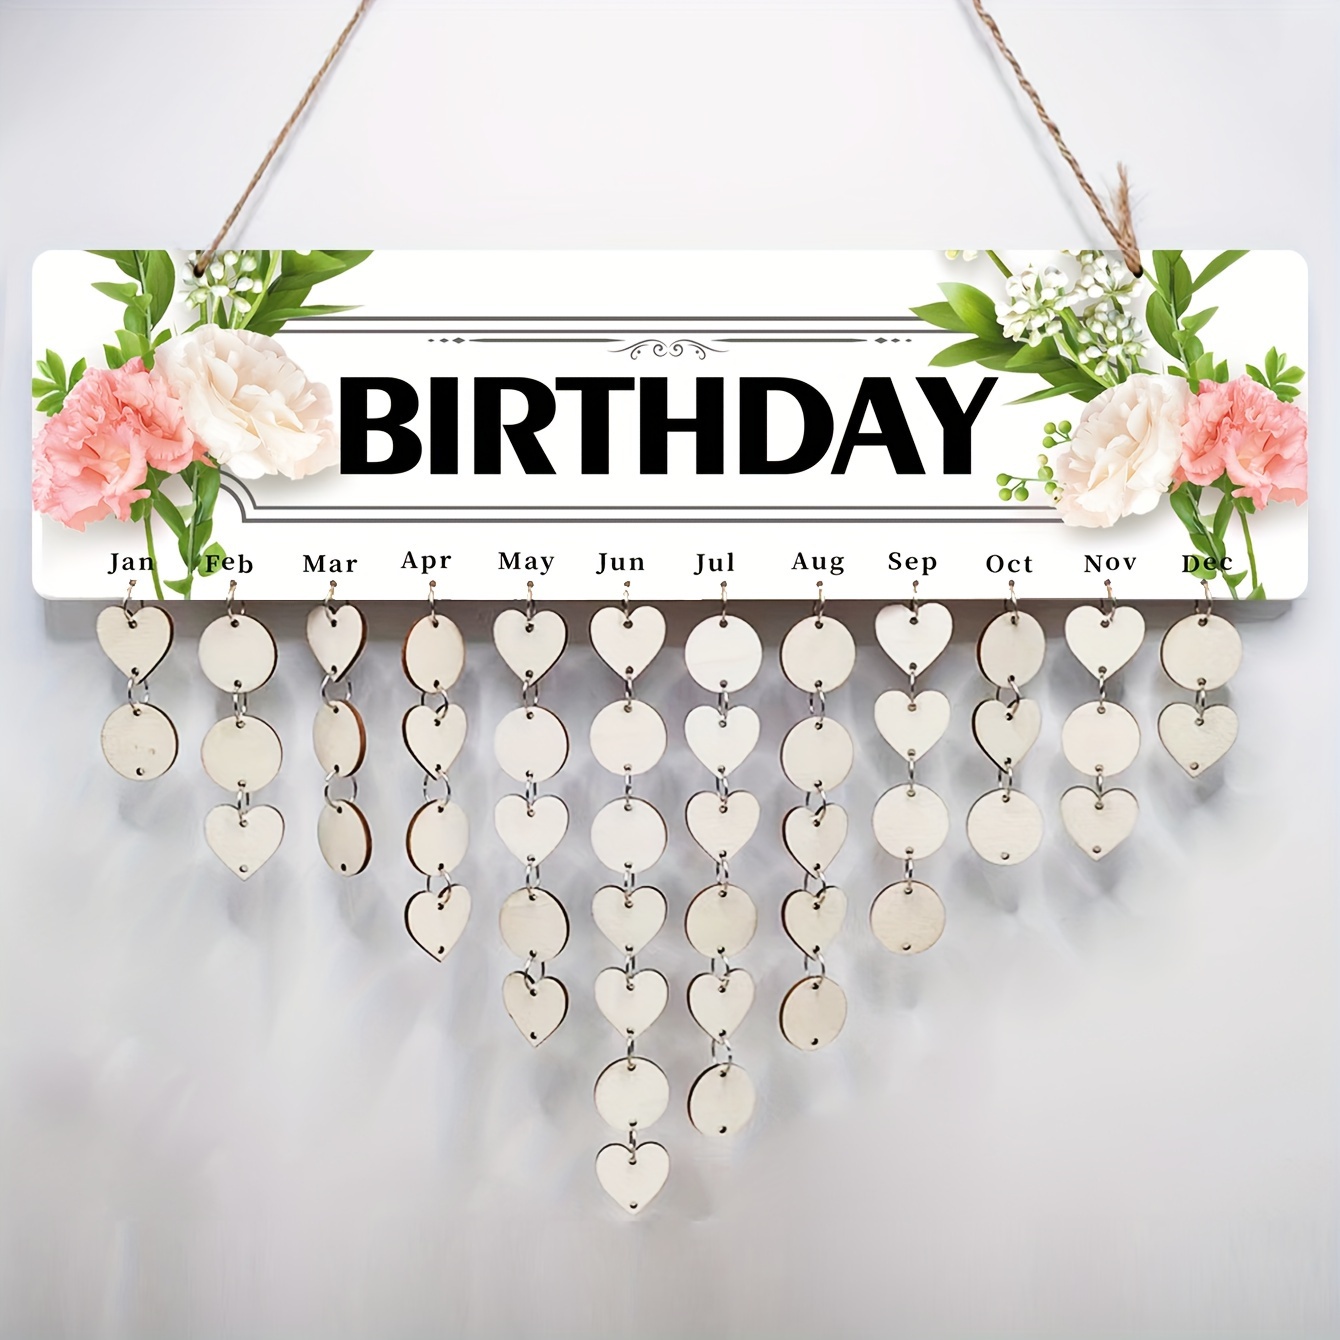 

Wooden Birthday Reminder Calendar Board With 50 Metal Rings And 28 Wood Circles - Diy Craft For Home & Family Special Dates - Wall Hanging Decor